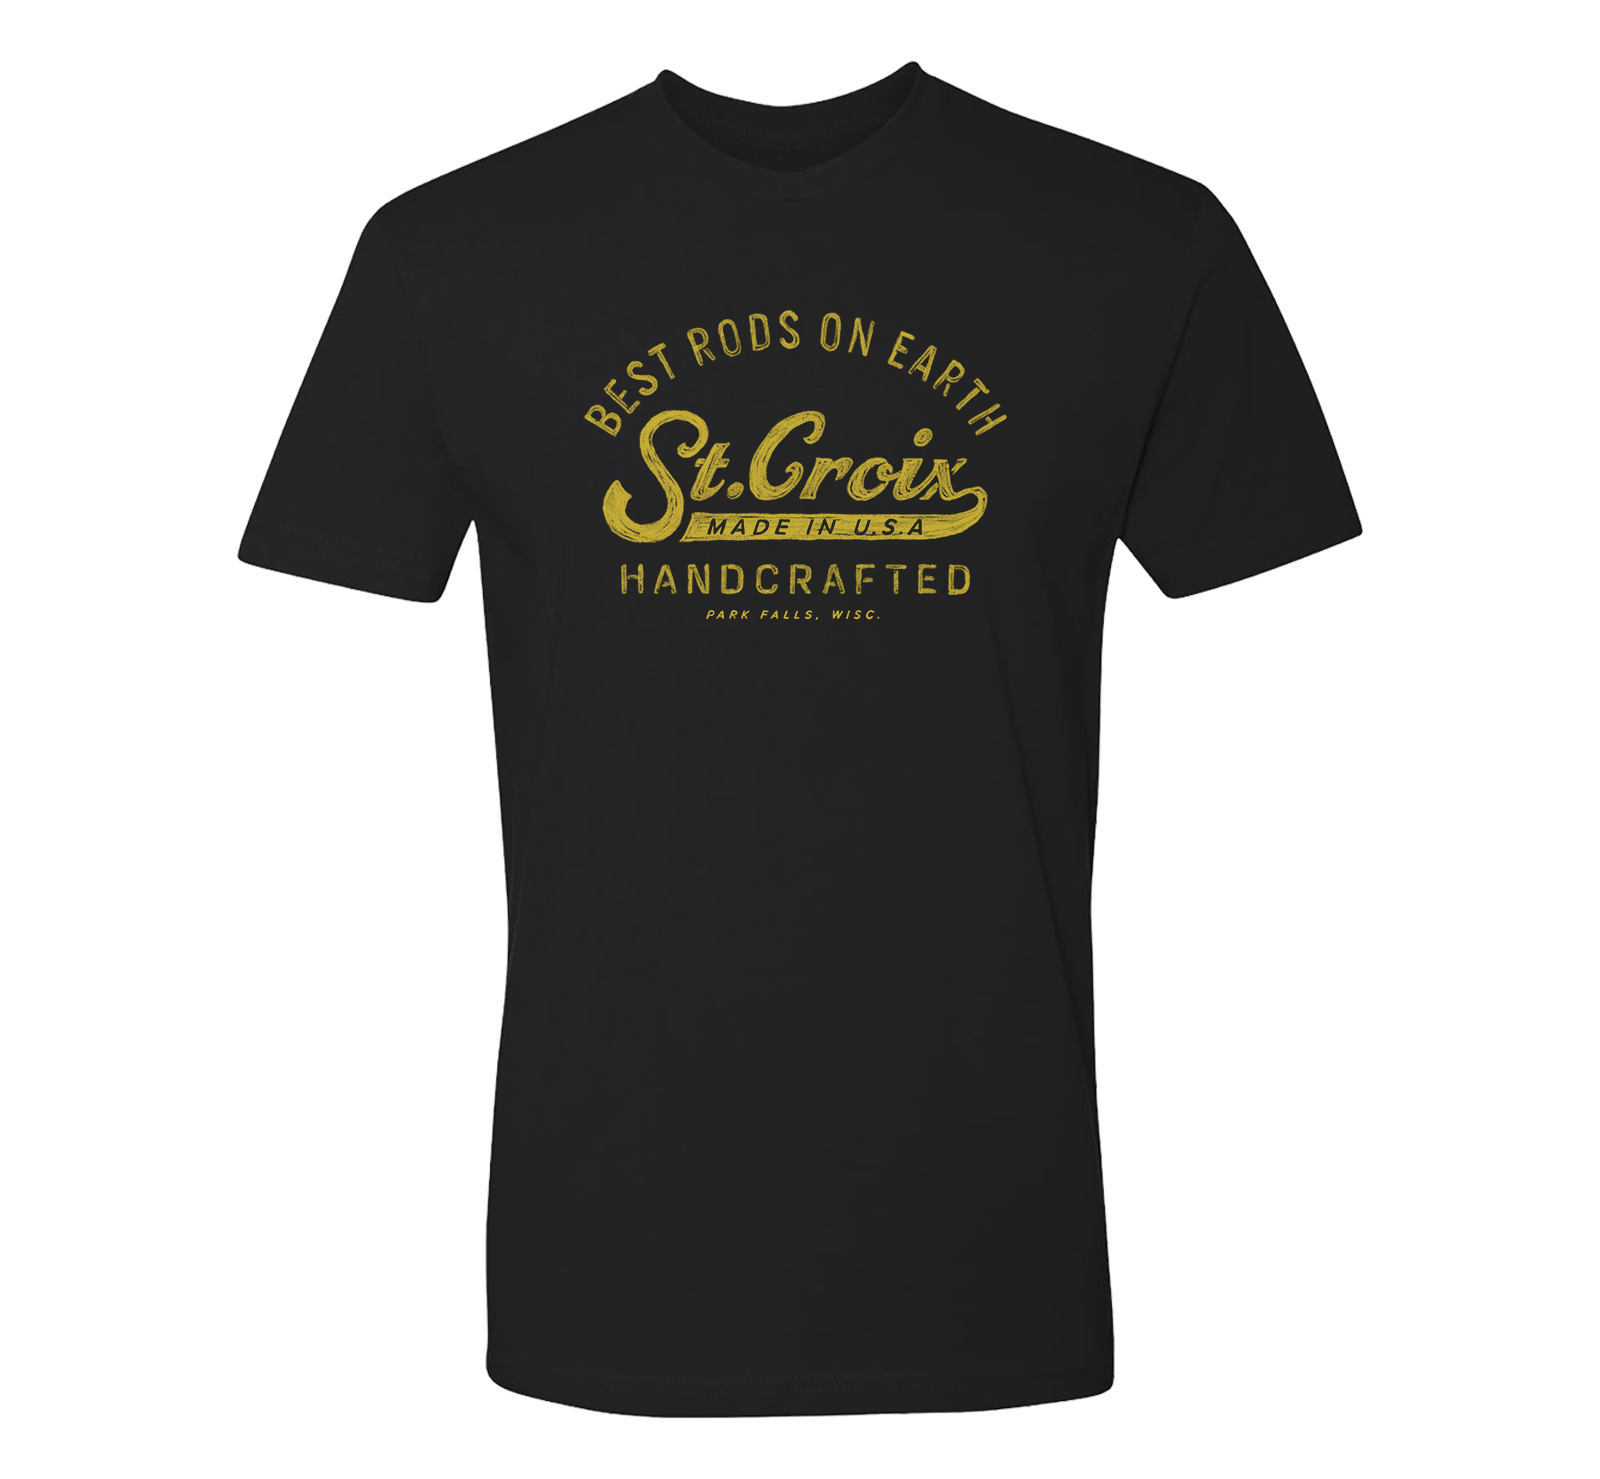 Best Rods on Earth Tee